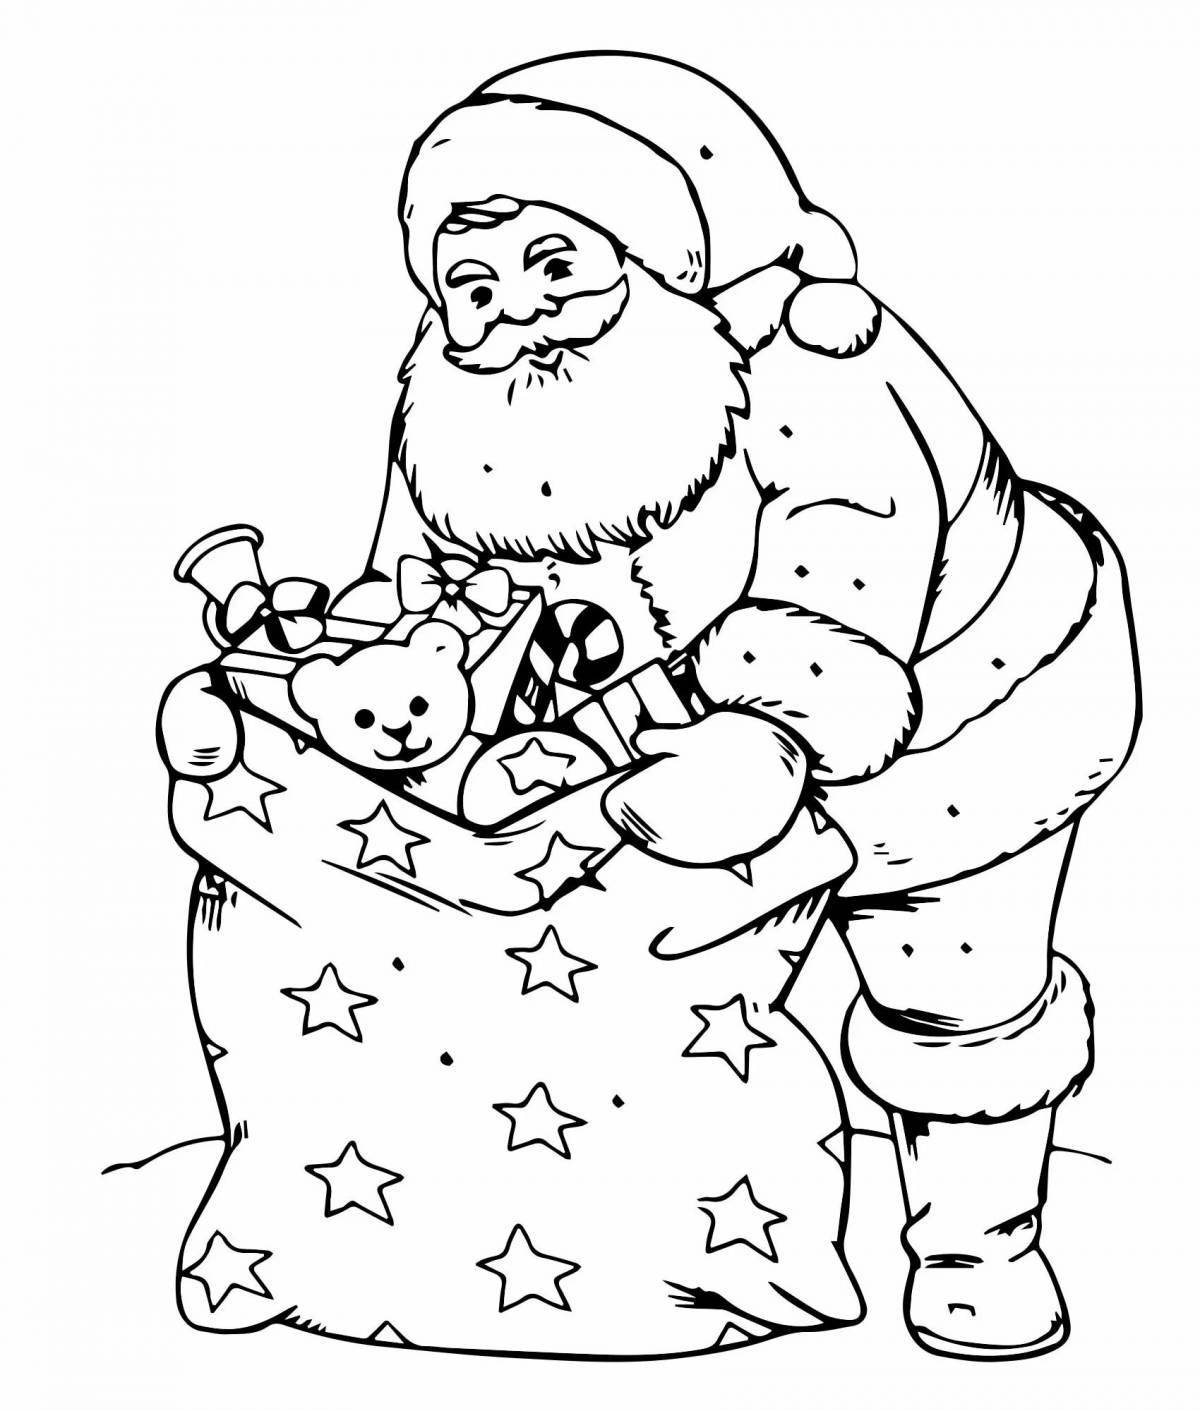 Coloring page cheerful santa claus for children 2-3 years old